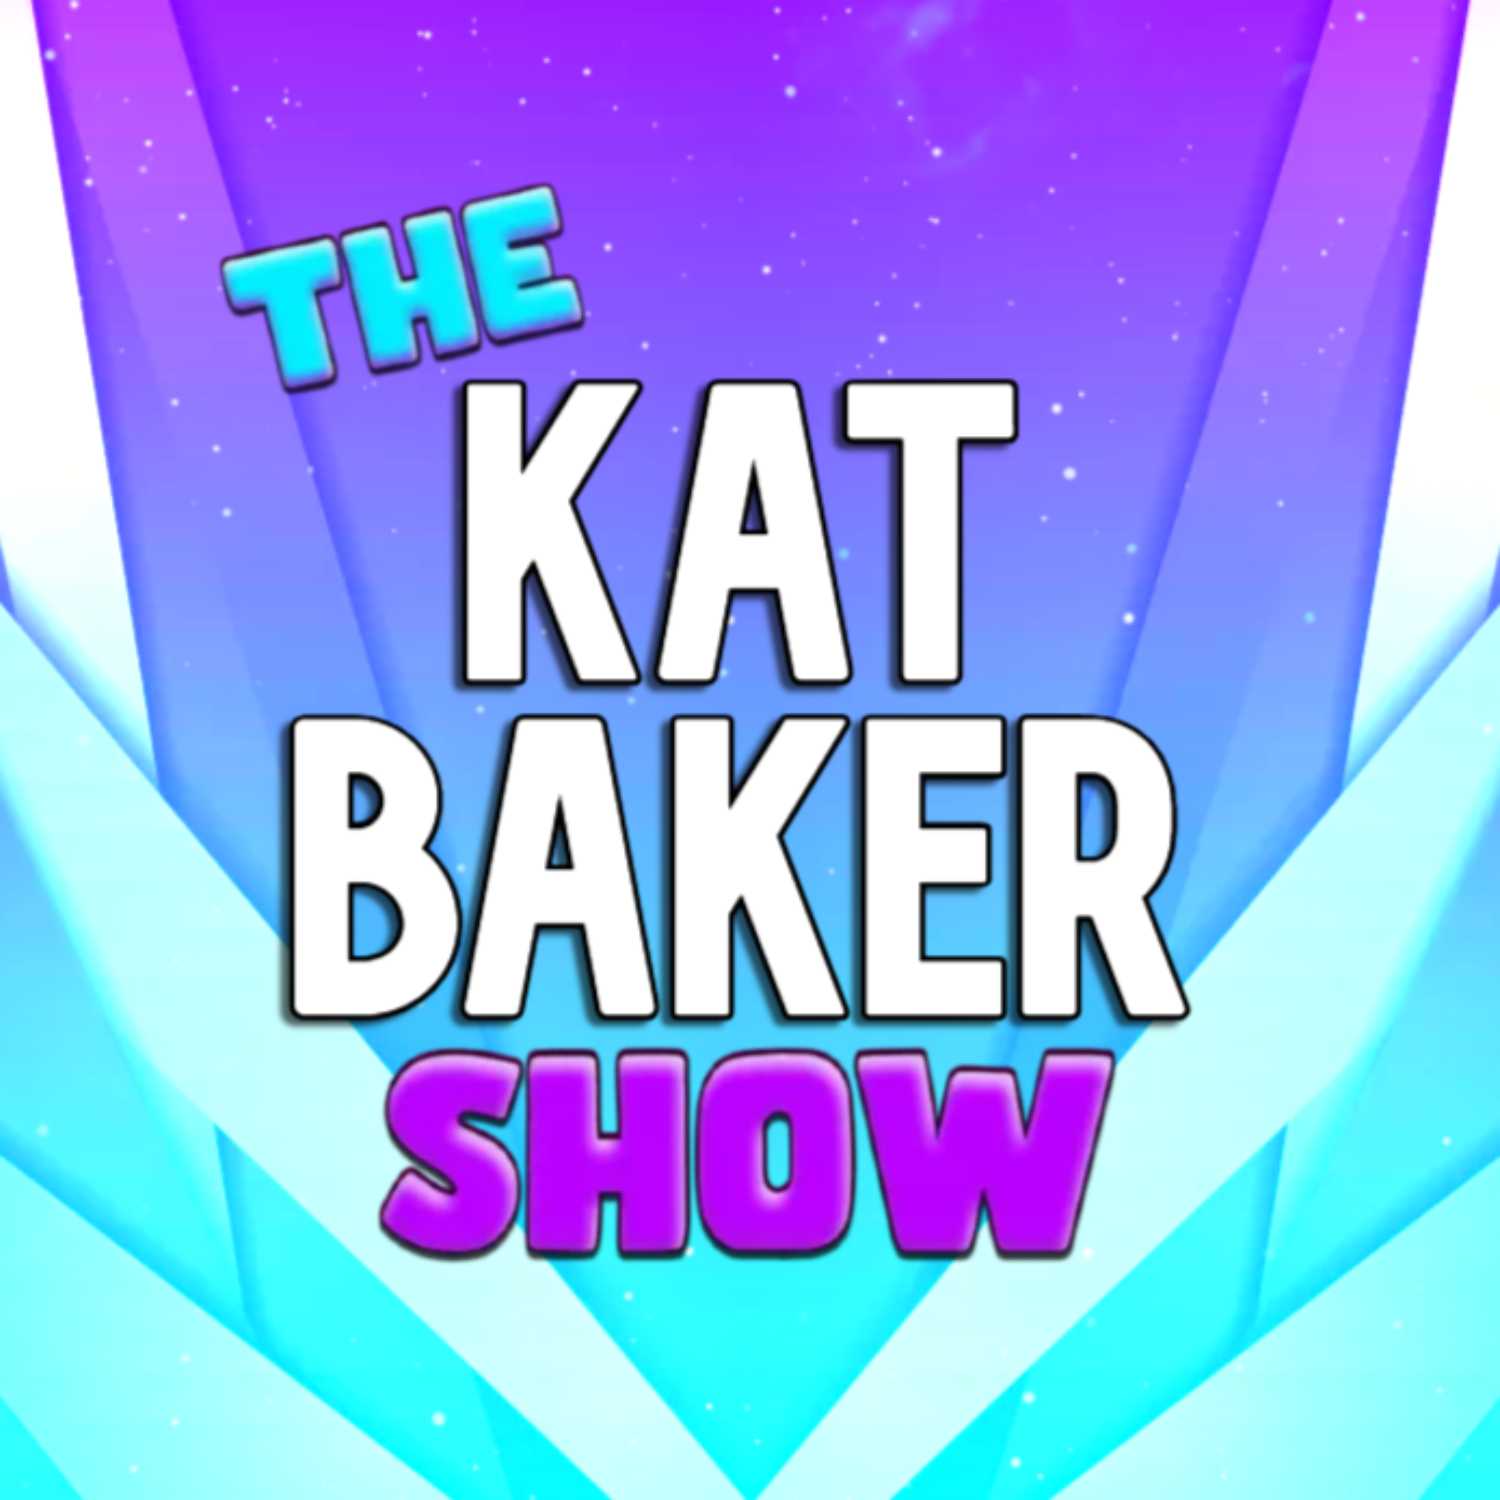 Calling out Laurence Fox & reclaiming Epstein's island: Greg Winfield on ginger rights - The Kat Baker Show ep.10